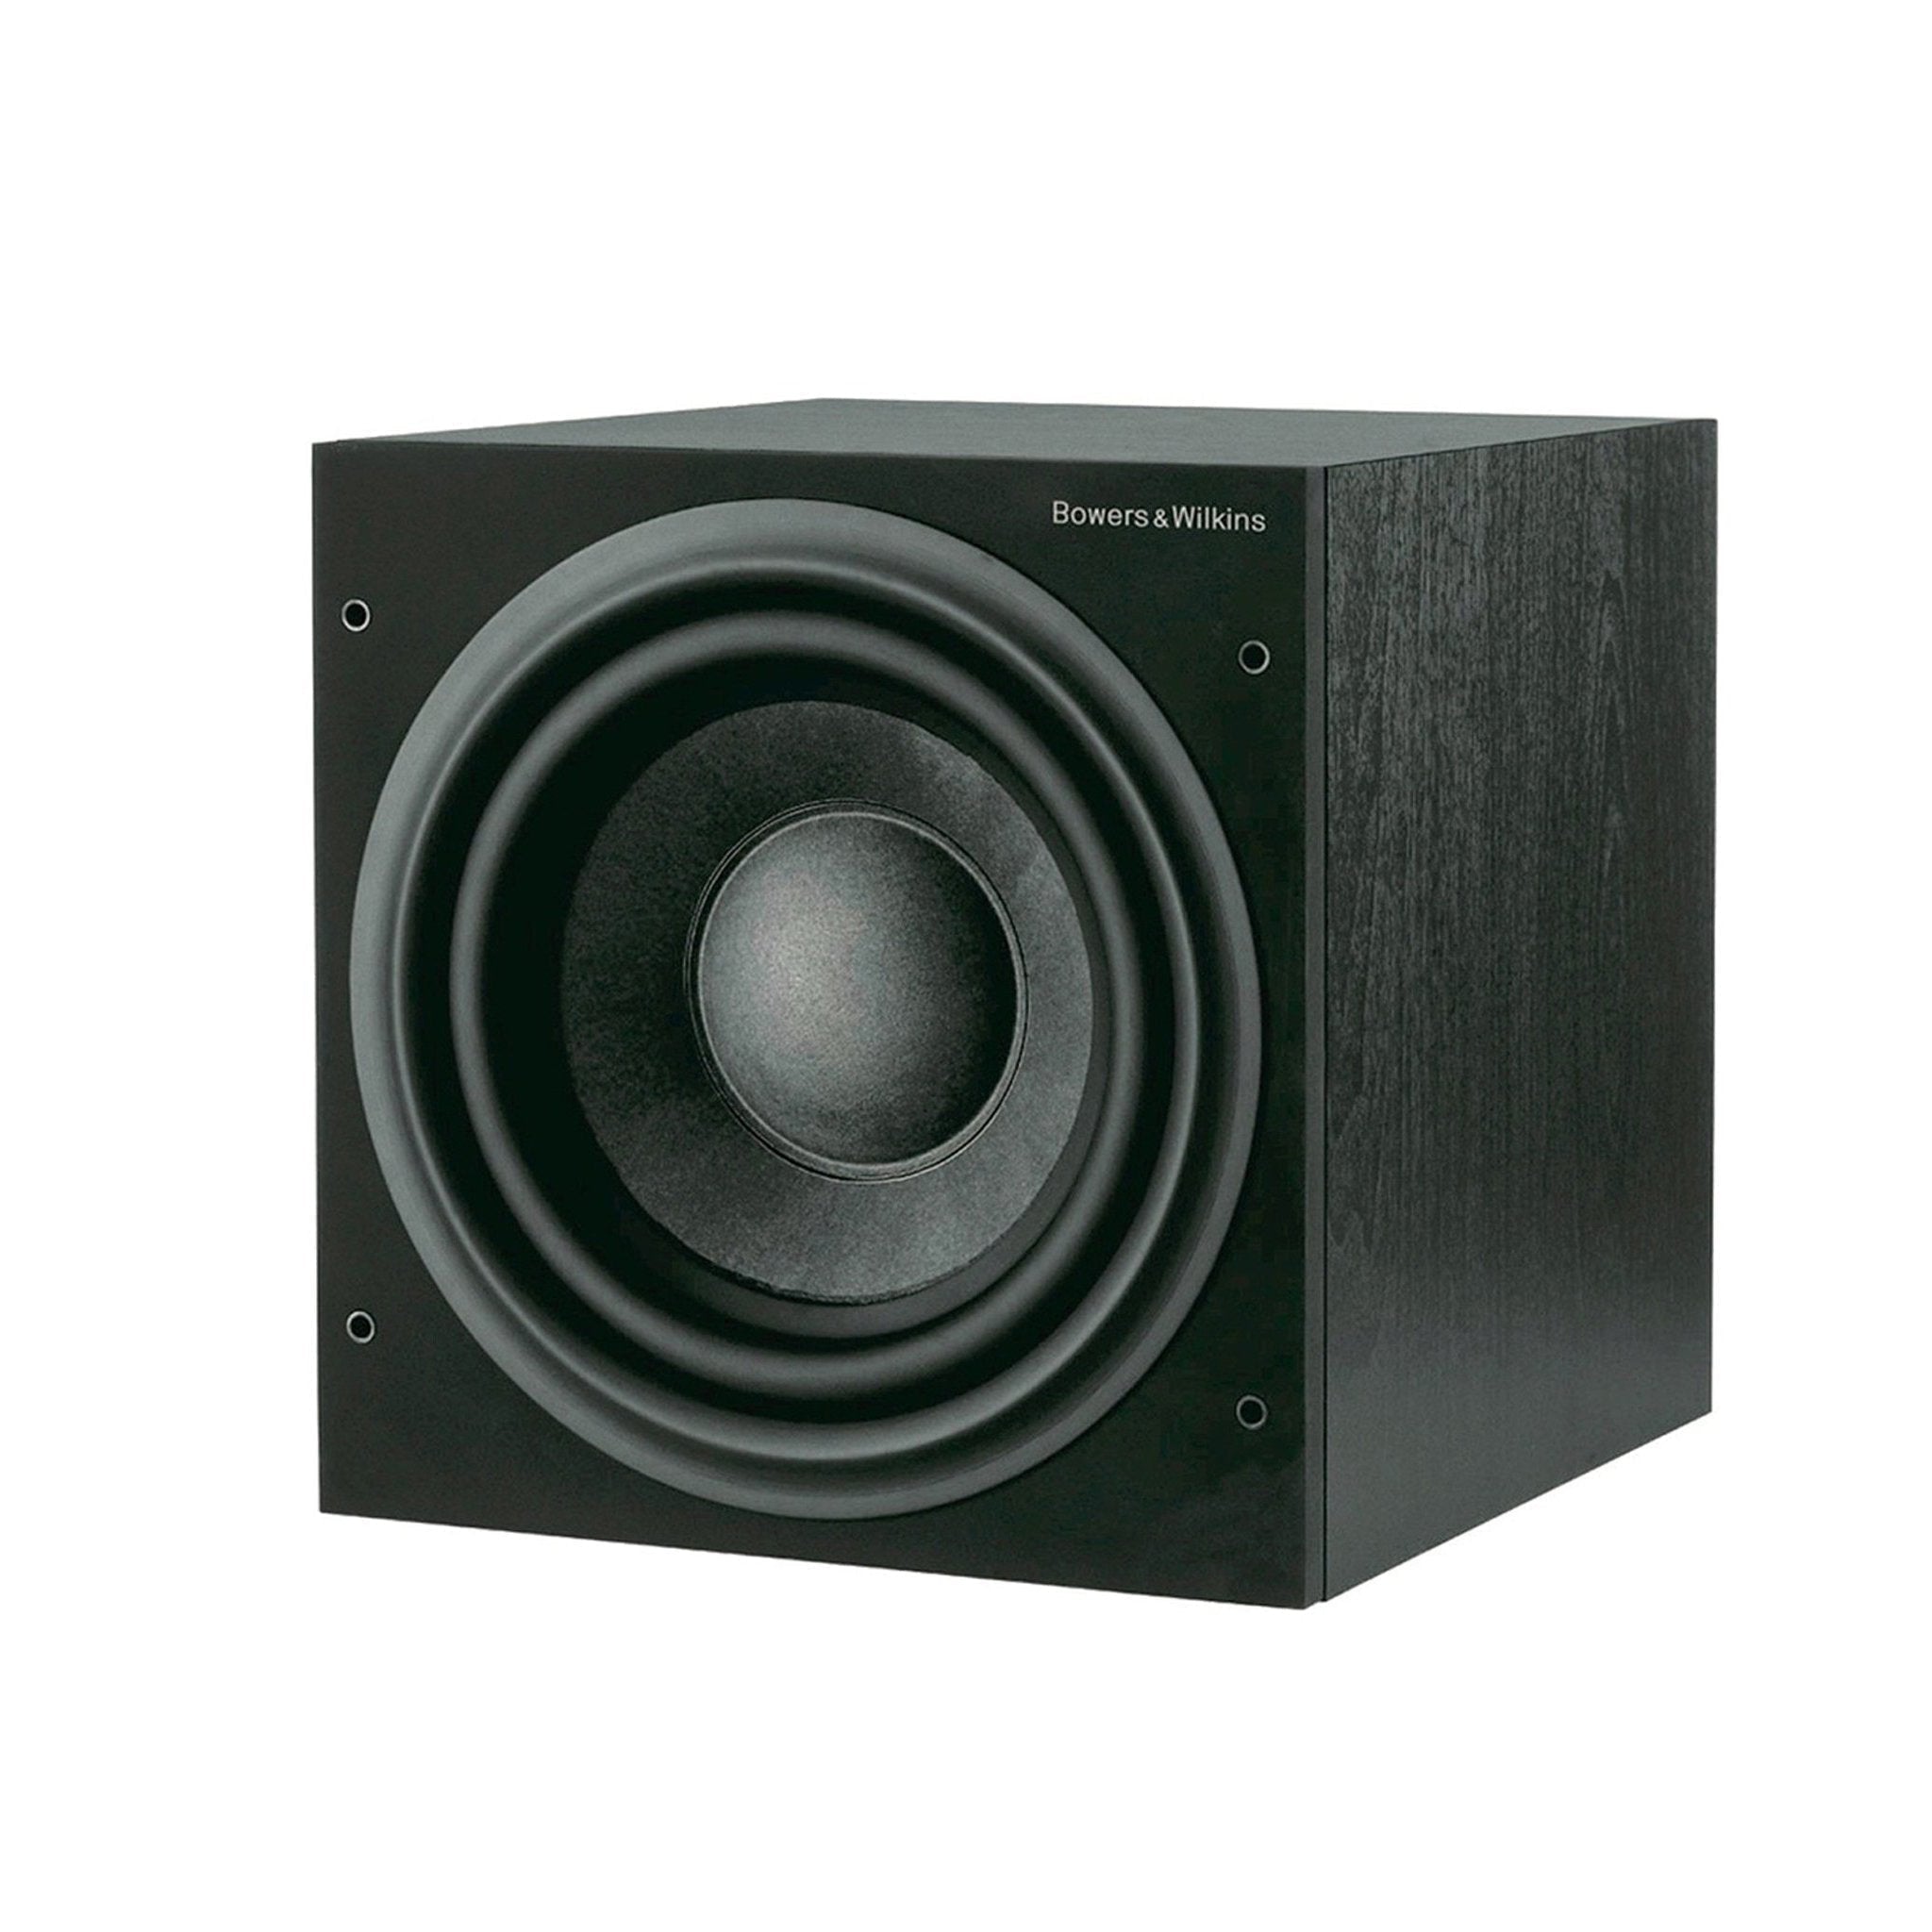 Bowers & Wilkins - ASW608 - 8" 200W Active Subwoofer Australia